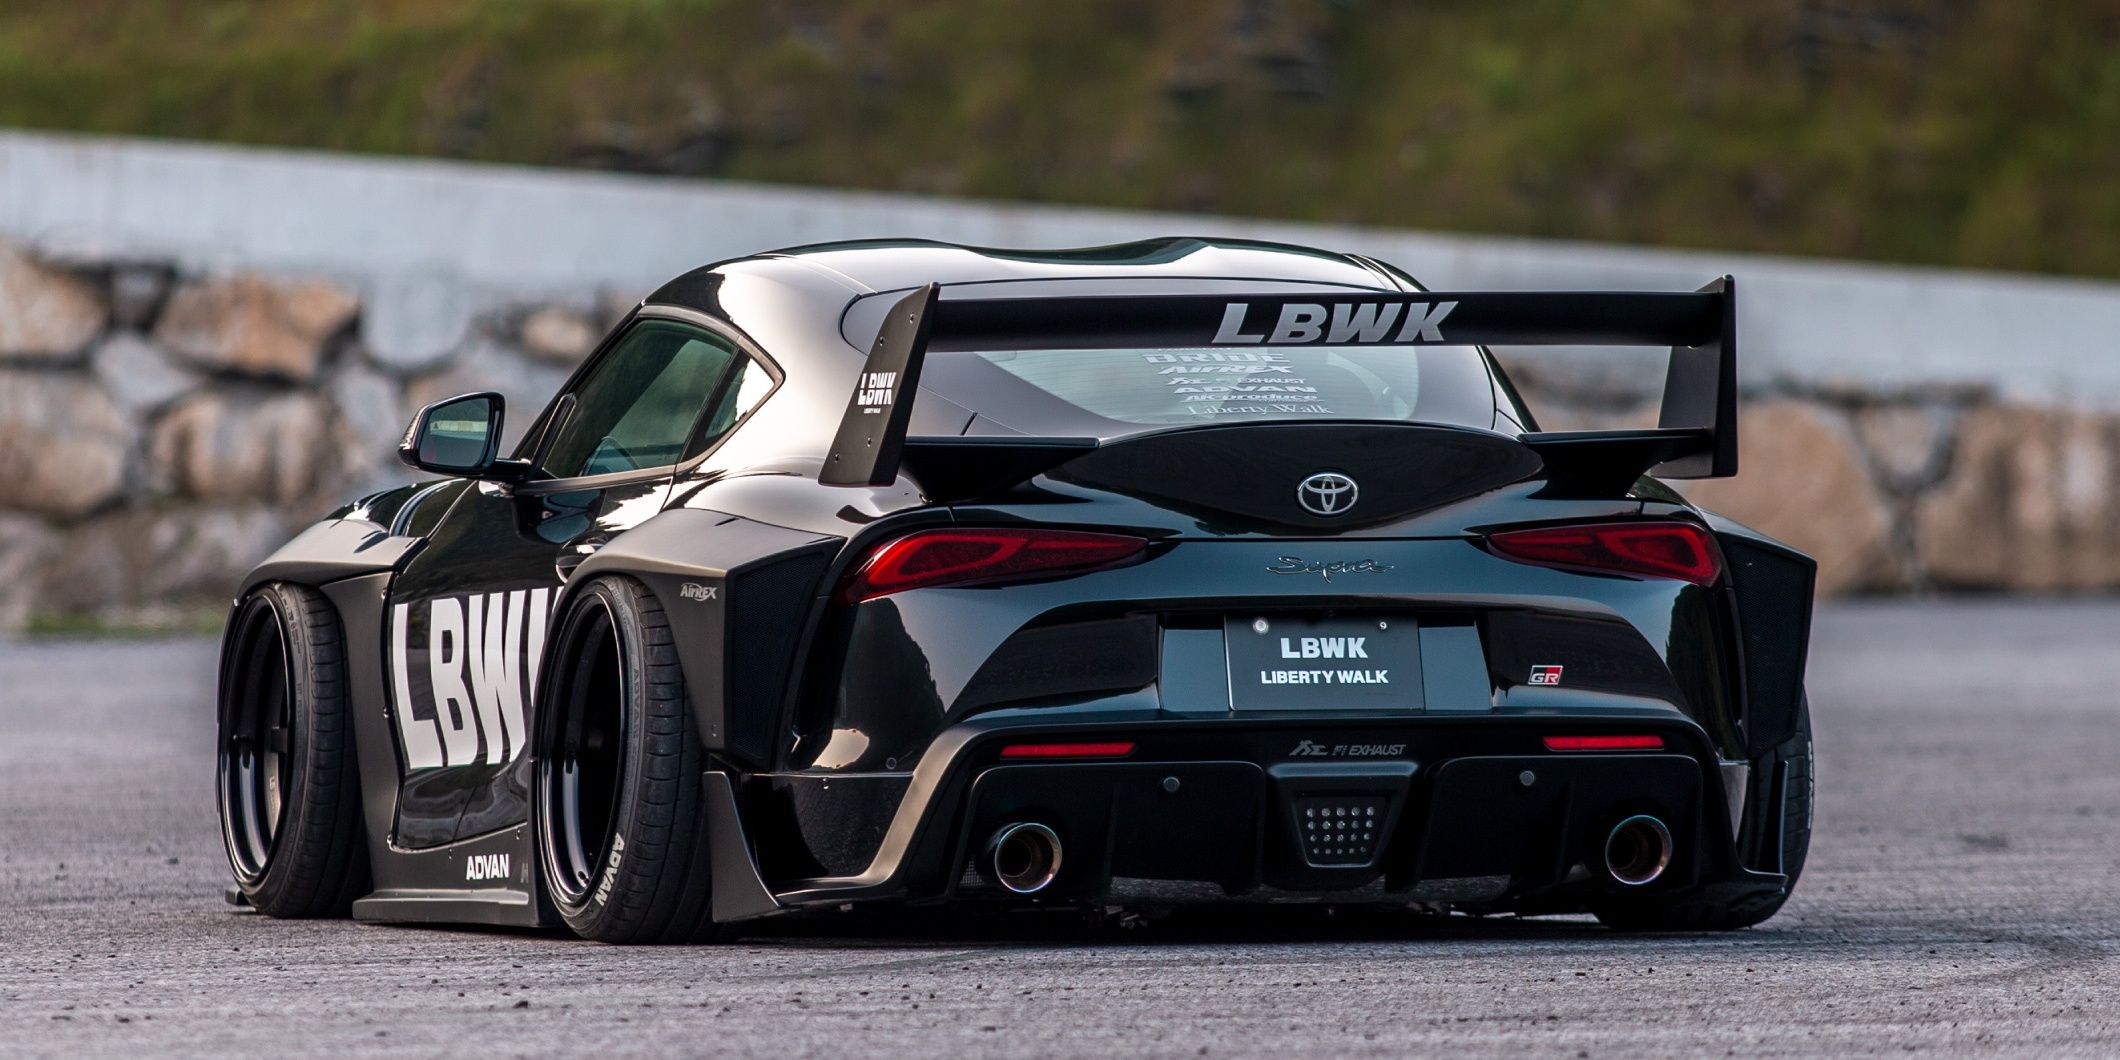 5 Wildest Body Kits From Liberty Walk (And 5 From Rocket Bunny)